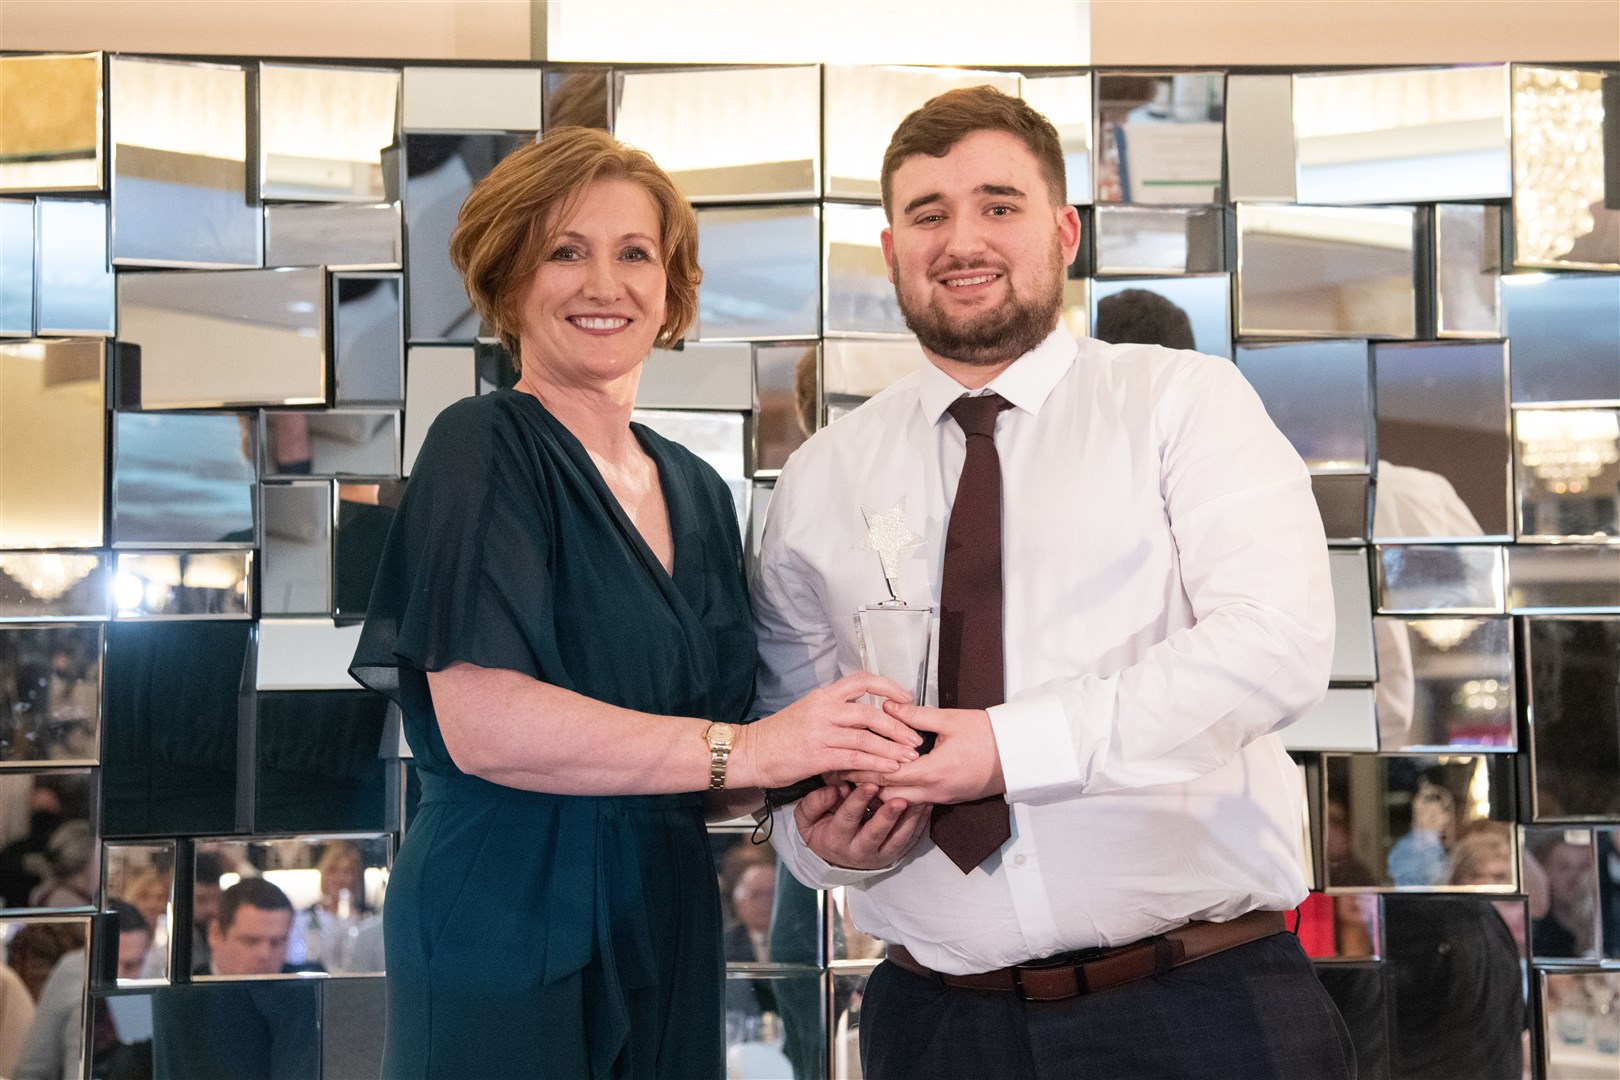 Sean Christie collects the carer award on behalf of his grandmother Lorraine Taylor from Elaine Taylor (no relation) of award sponsor Parklands. Picture: Daniel Forsyth